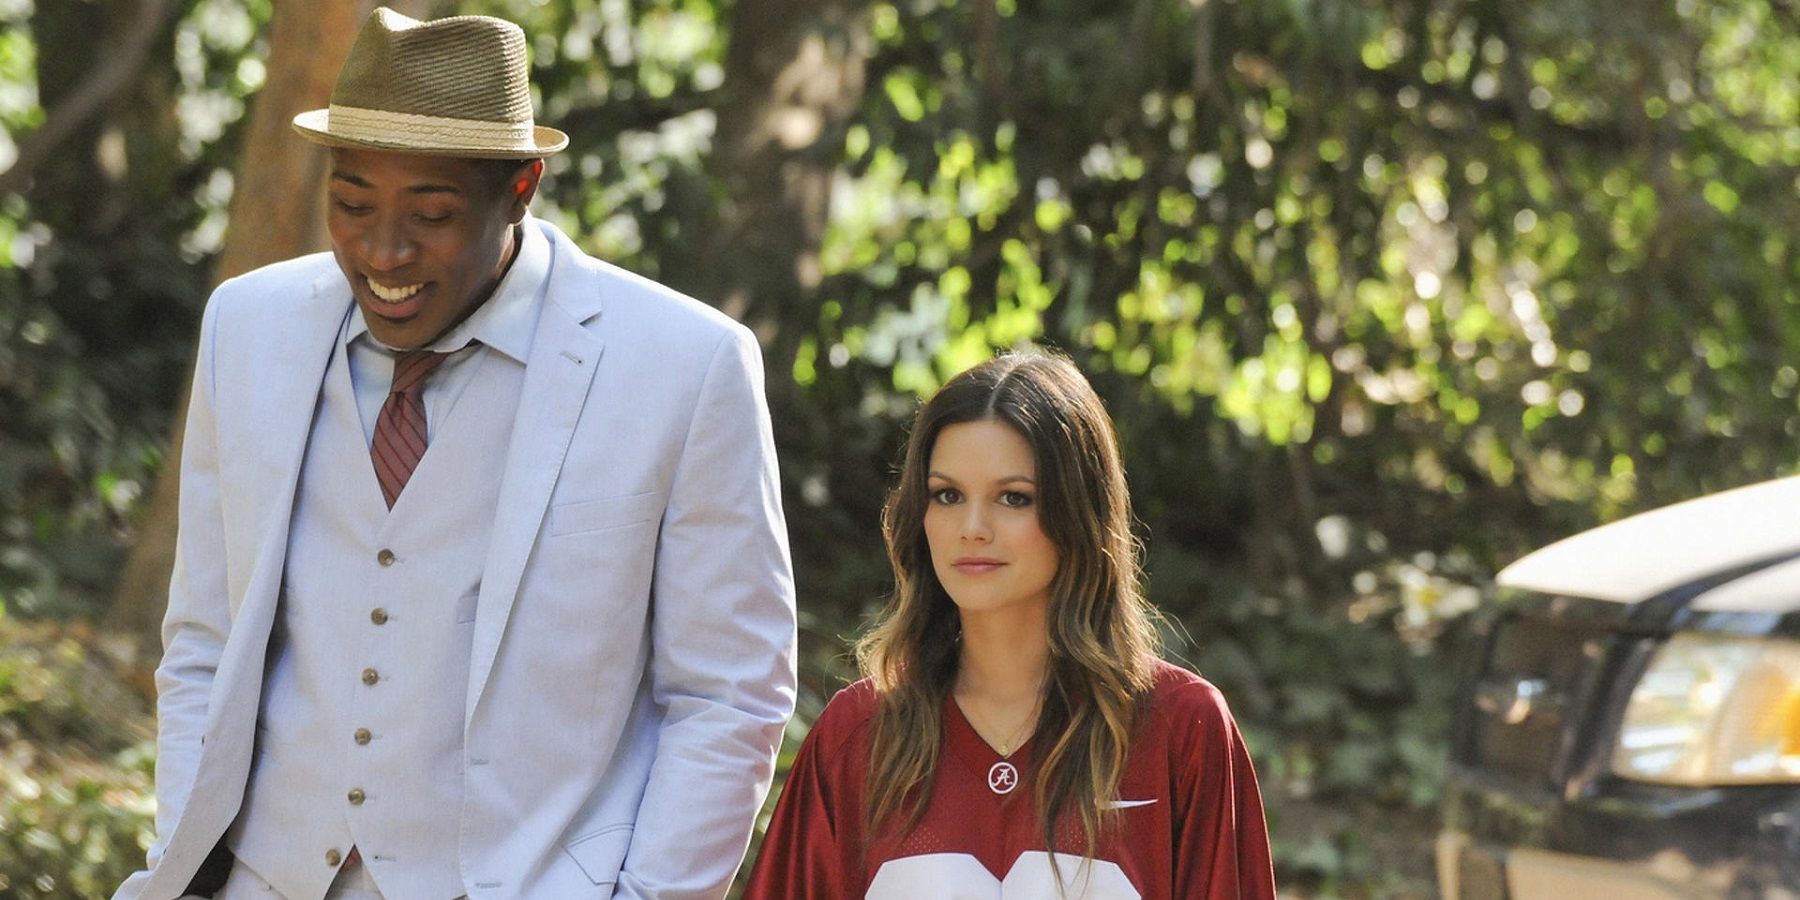 The 10 Best Episodes Of Hart Of Dixie (According To IMDb)